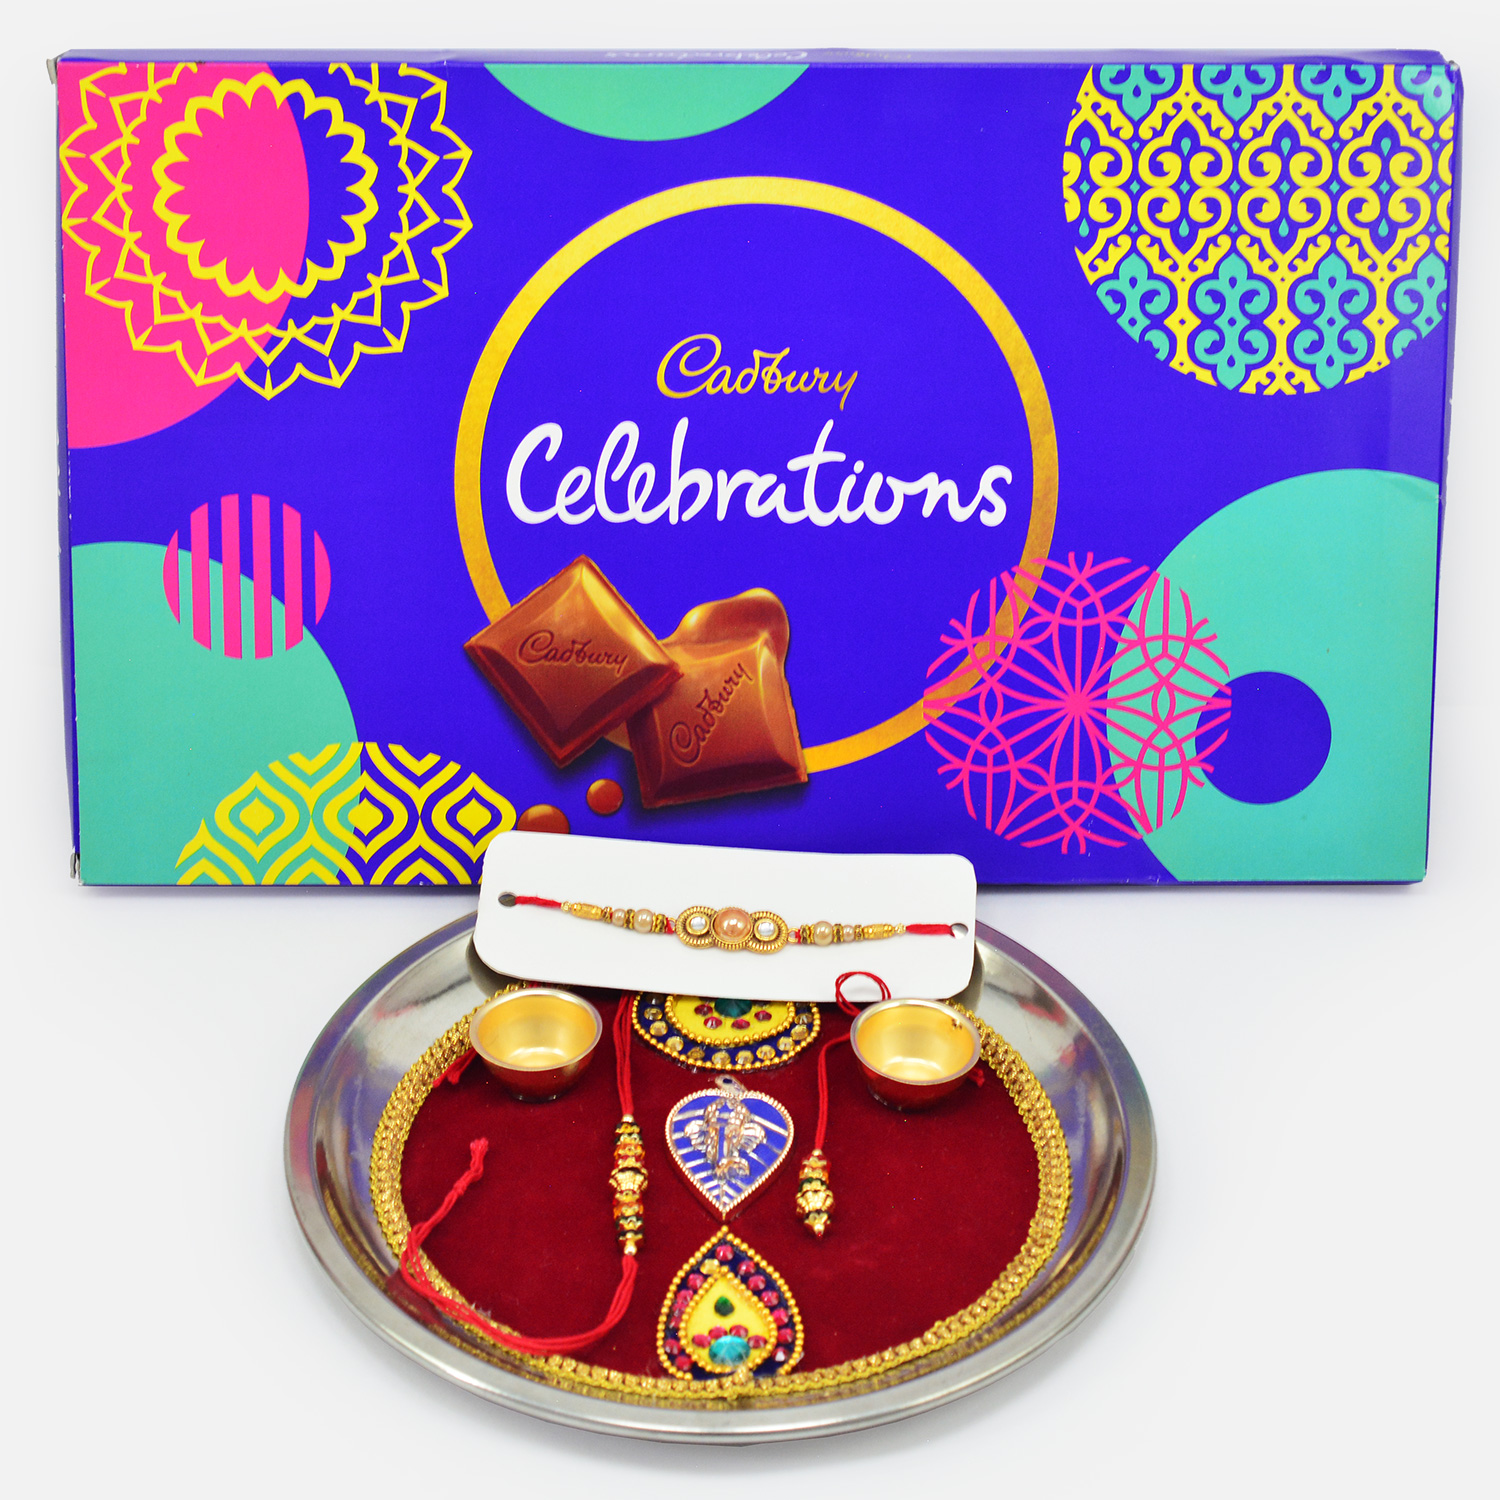 Cadbury Celebrations Rich Dry Fruit Collection Chocolate Gift Pack Price -  Buy Online at Best Price in India